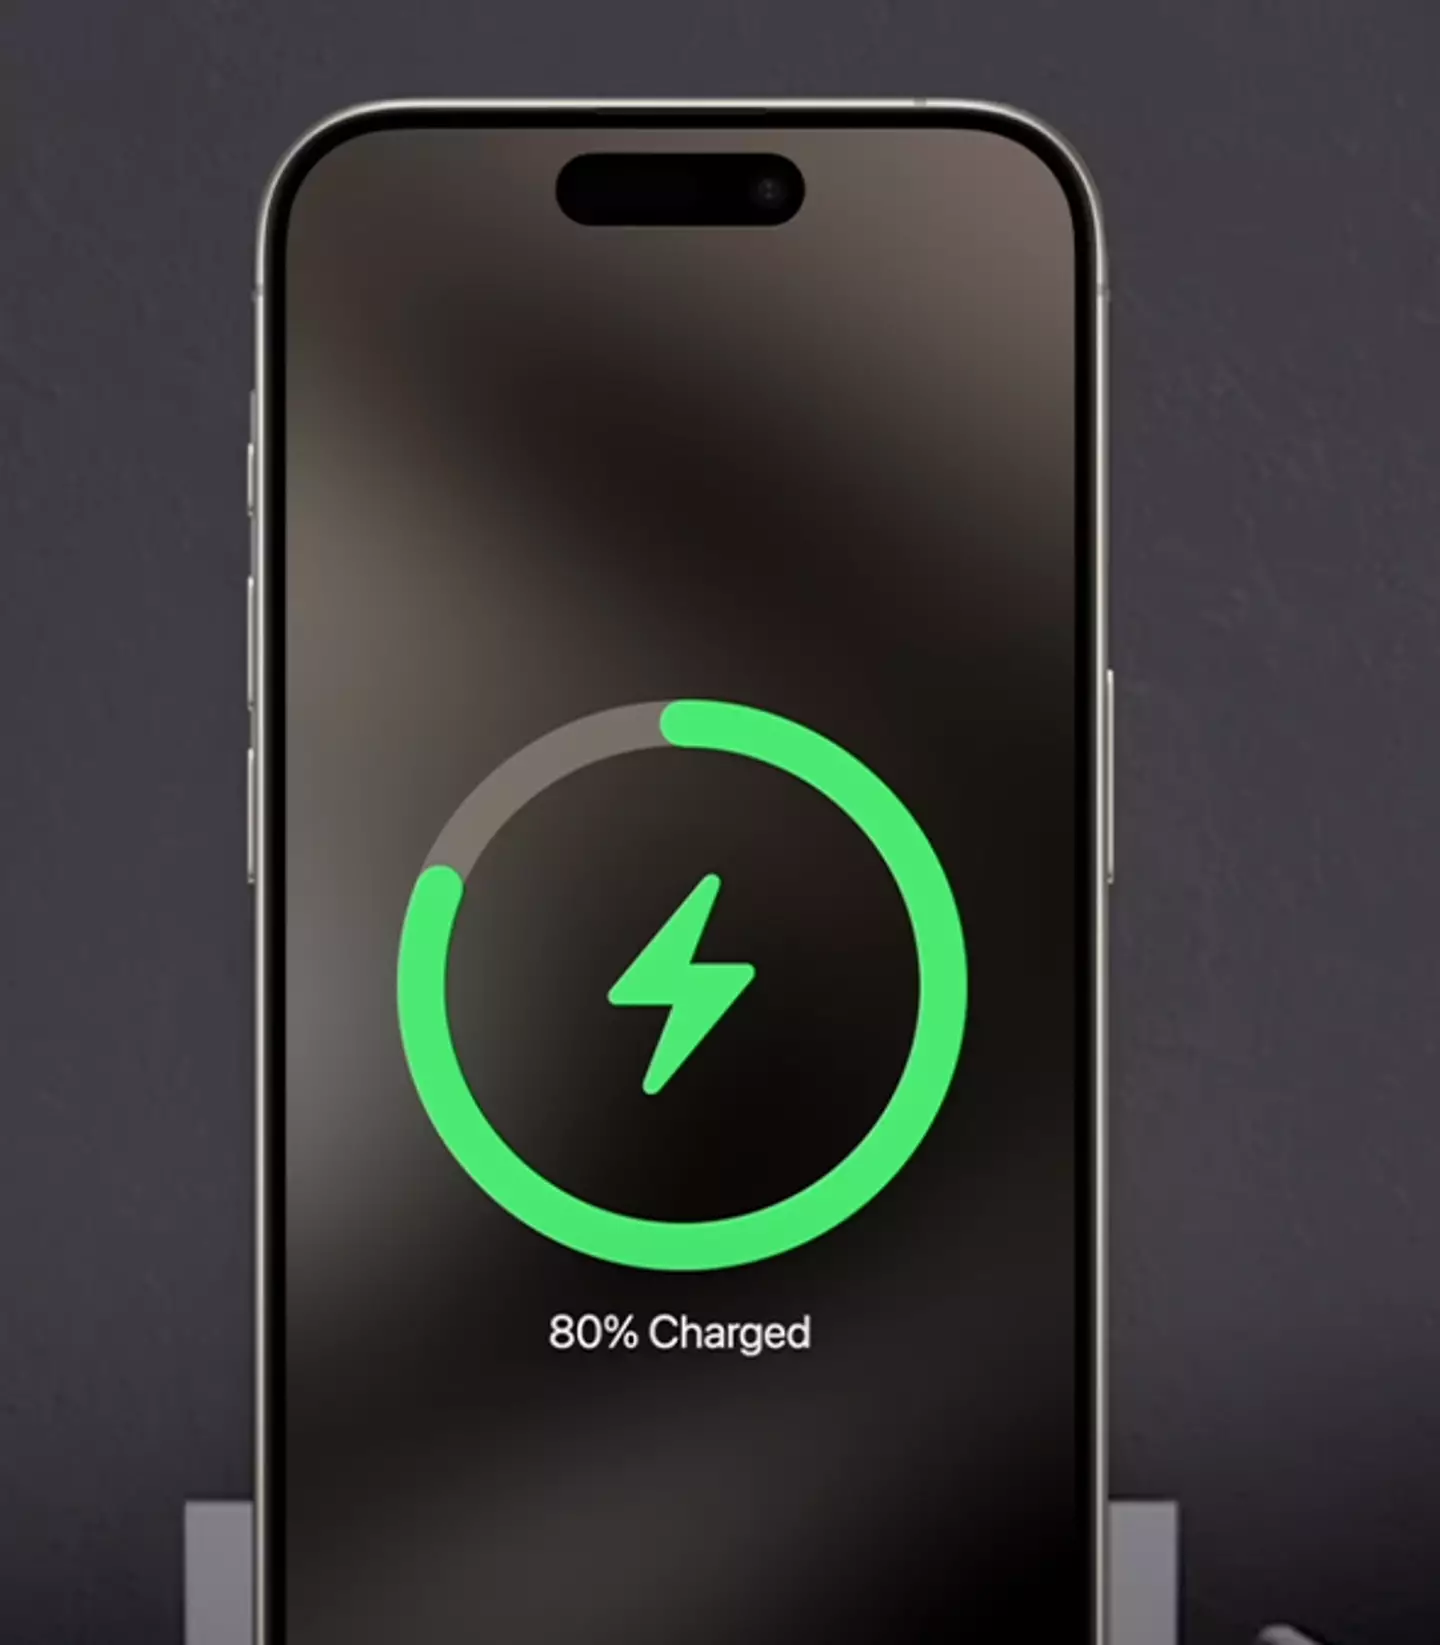 iPhones have a feature that caps their battery charging capacity at 80% / @AppleExplained/YouTube